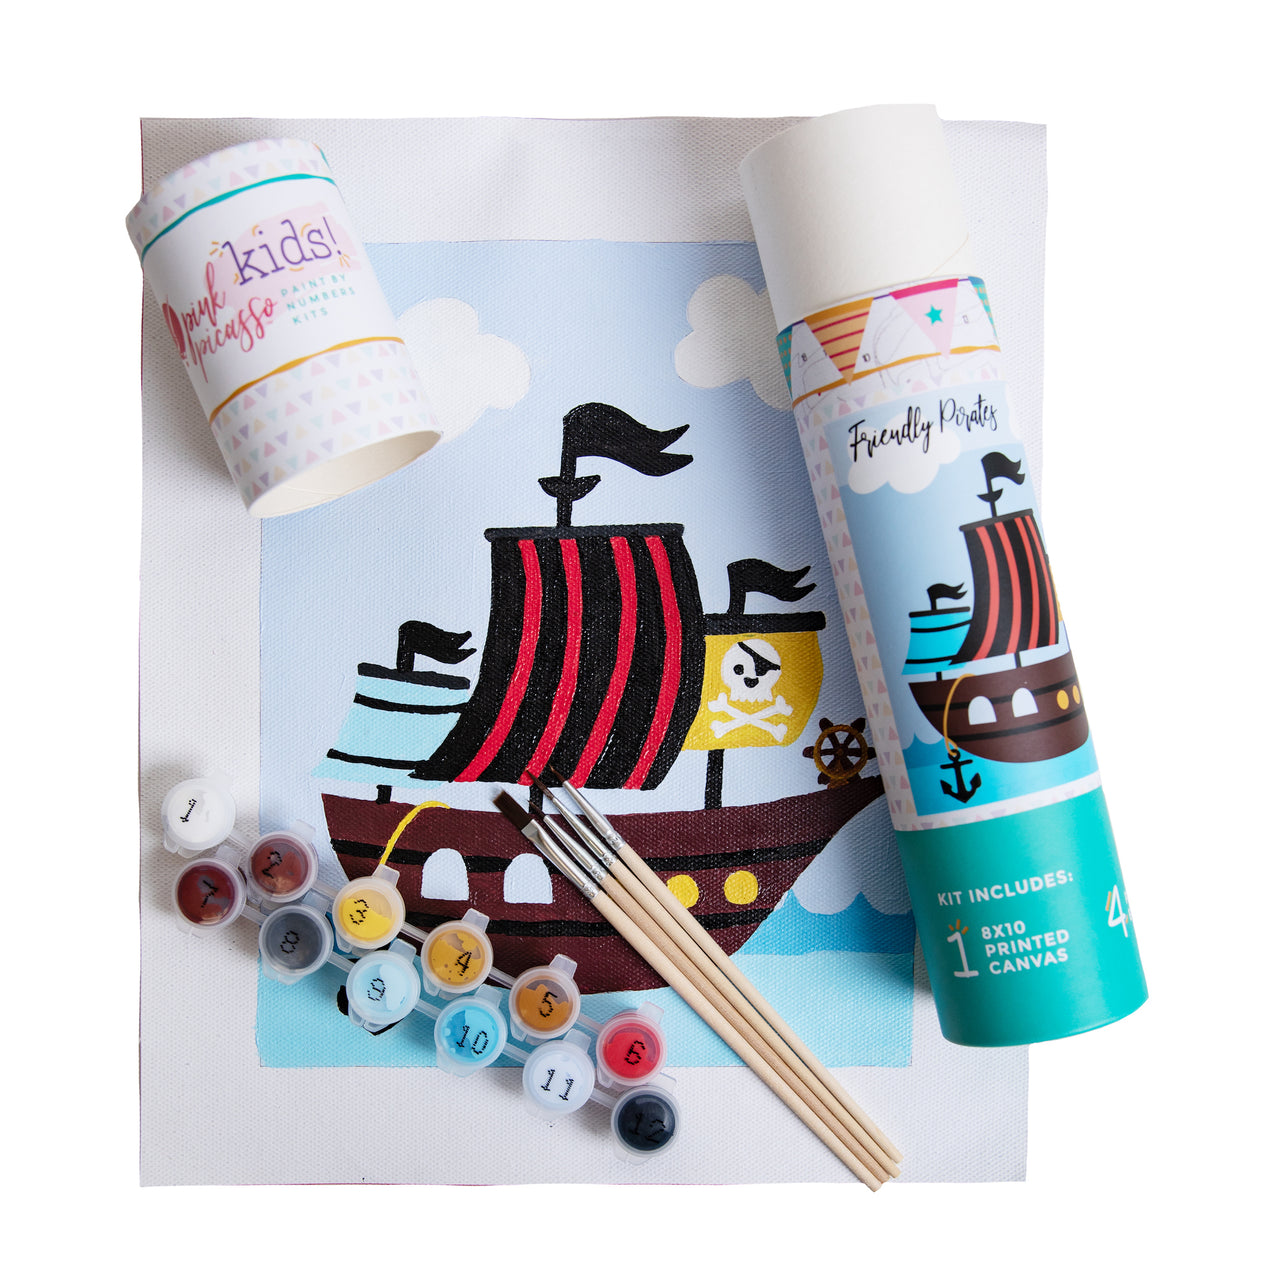 Friendly Pirates - Pink Picasso Kits